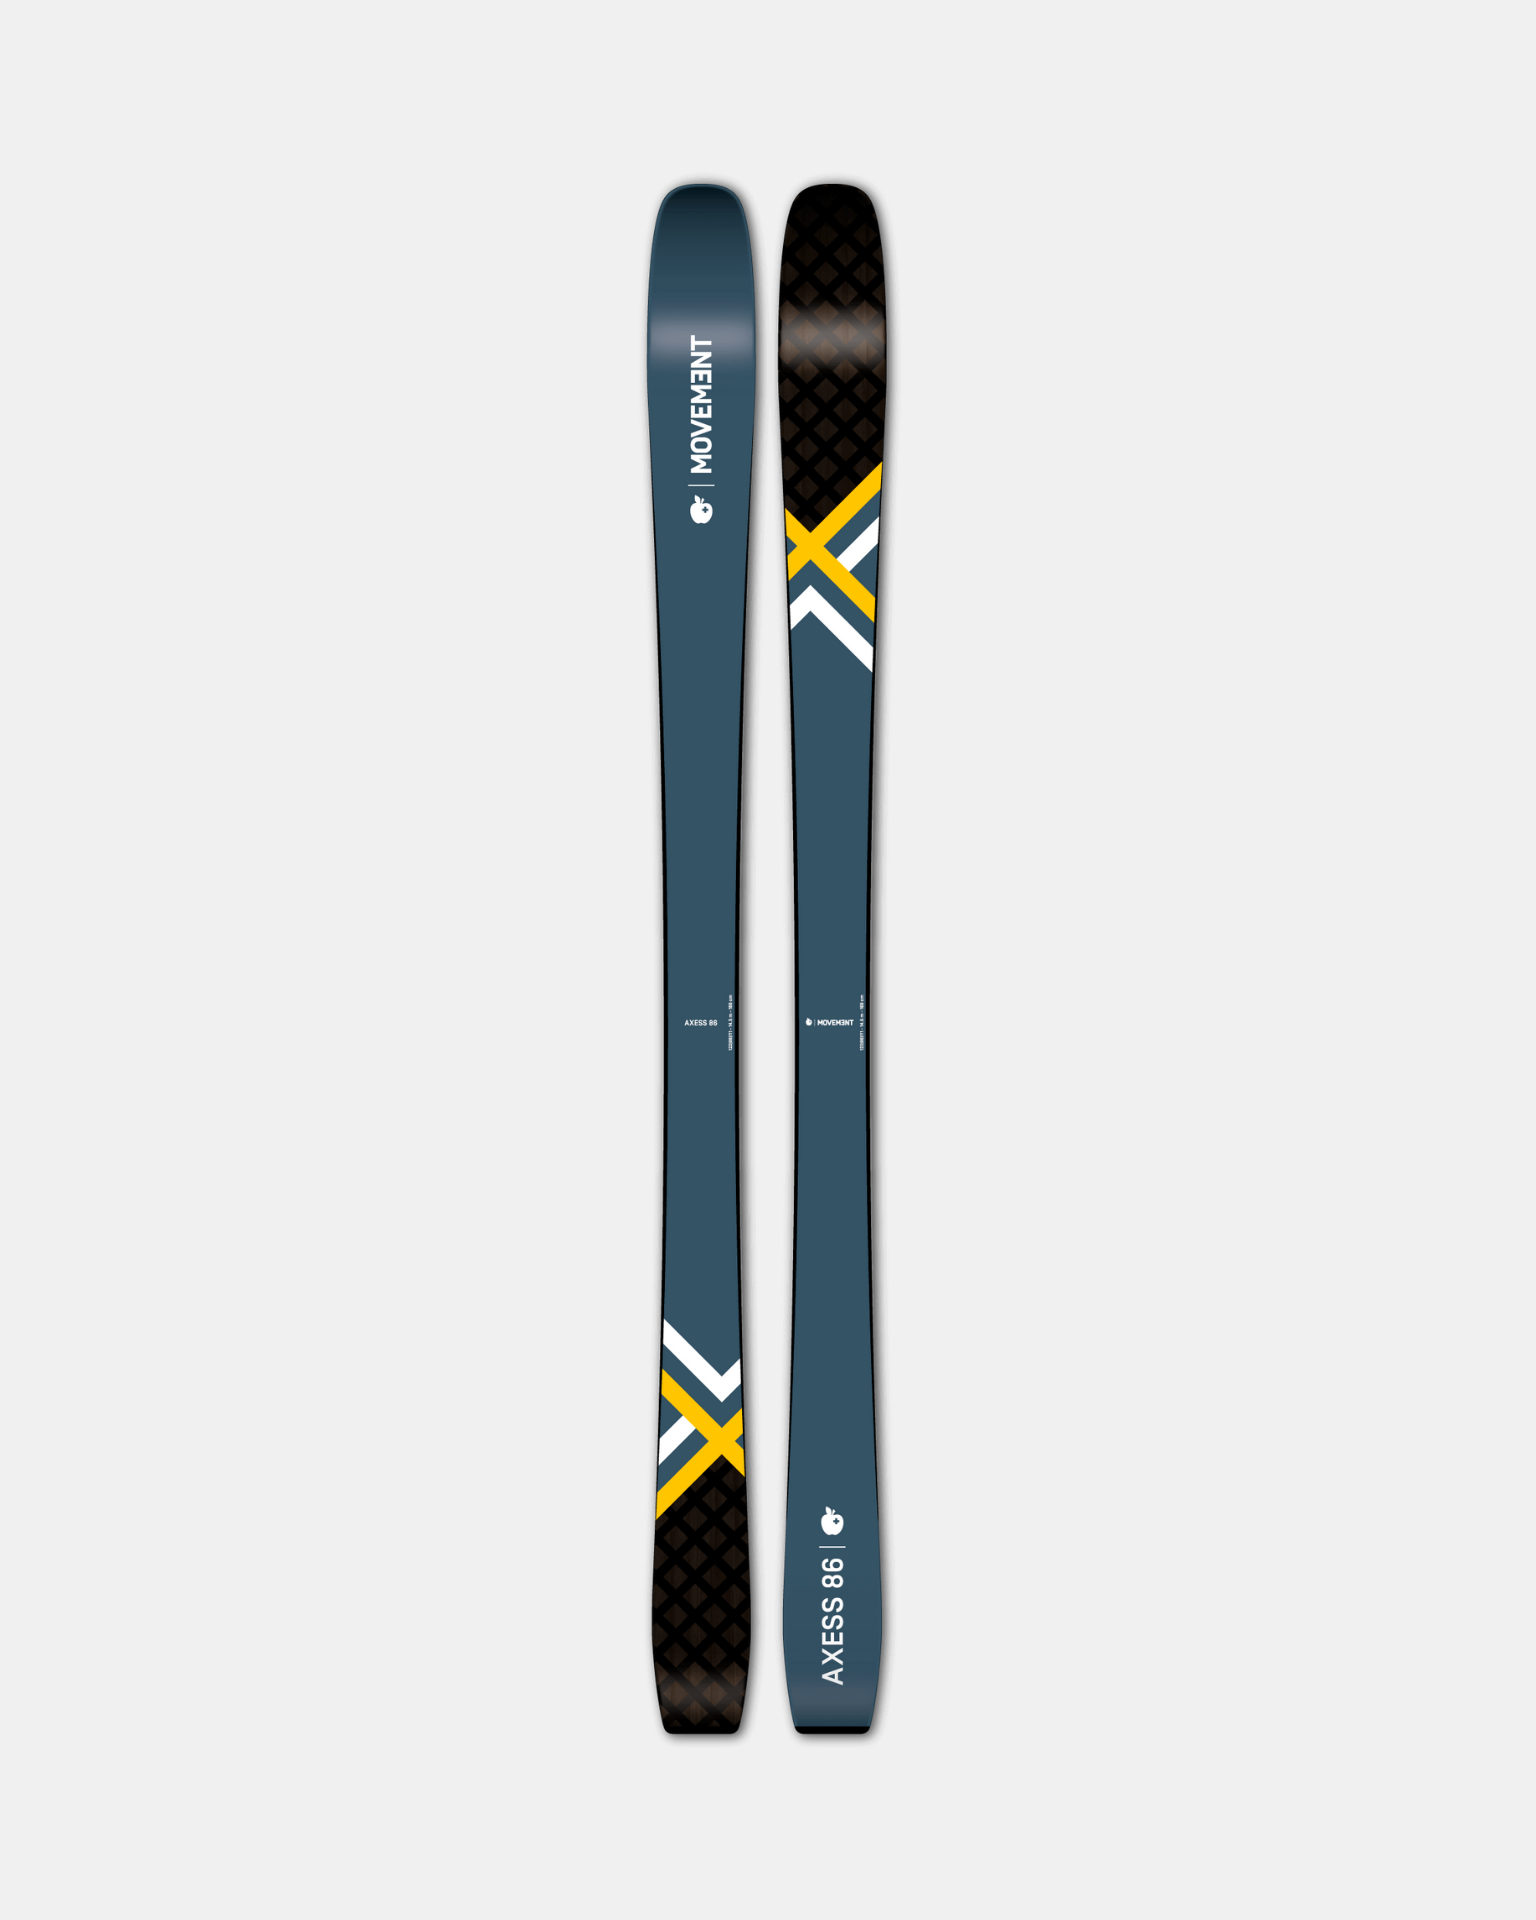 Master diverse terrain with Movement's Axess 86 all-terrain skis.